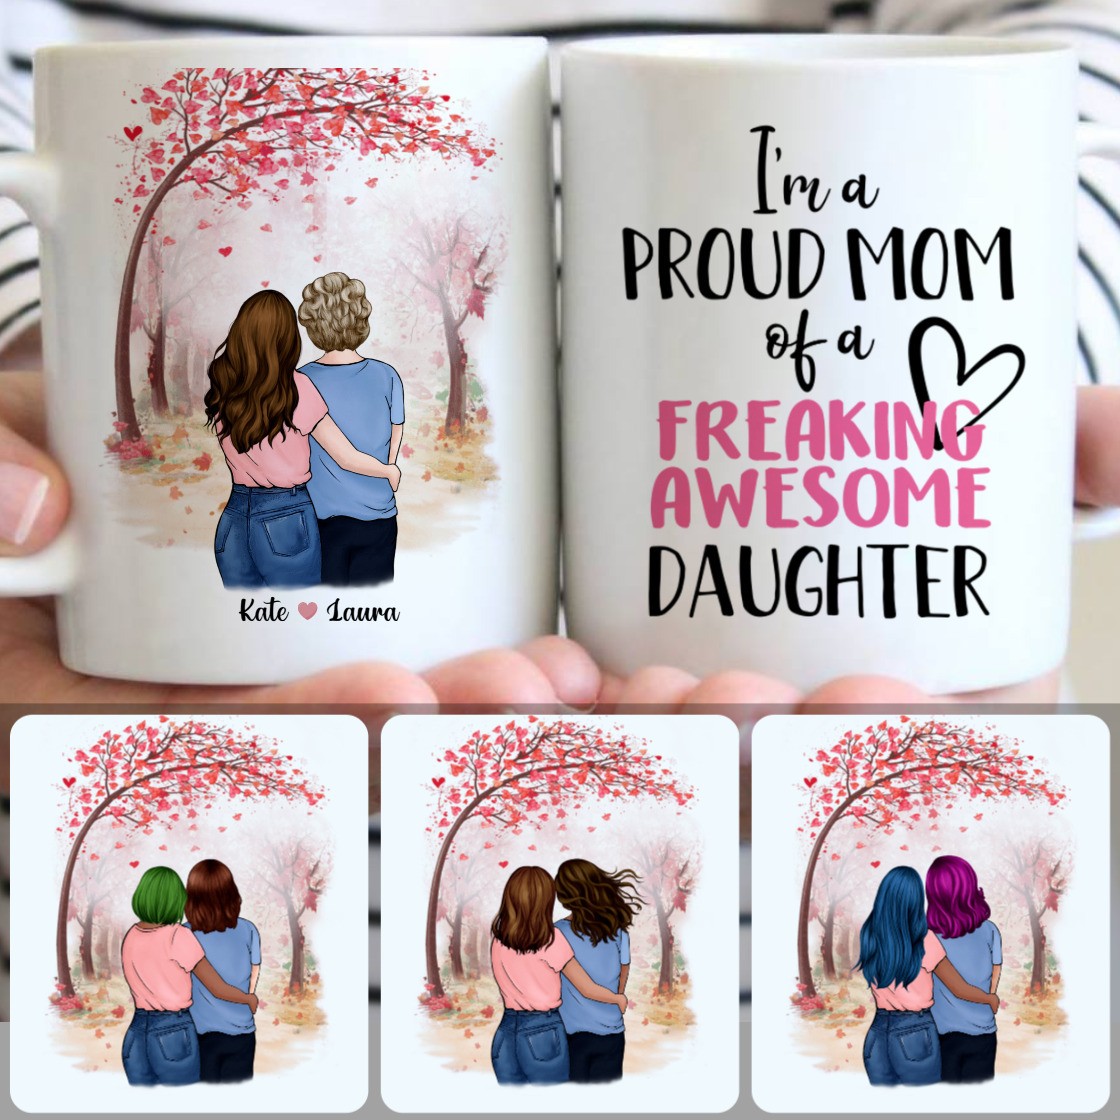 Personalized Mug, Perfect Gifts For Stepmom, Mother & Daughter Customized Coffee Mug With Names